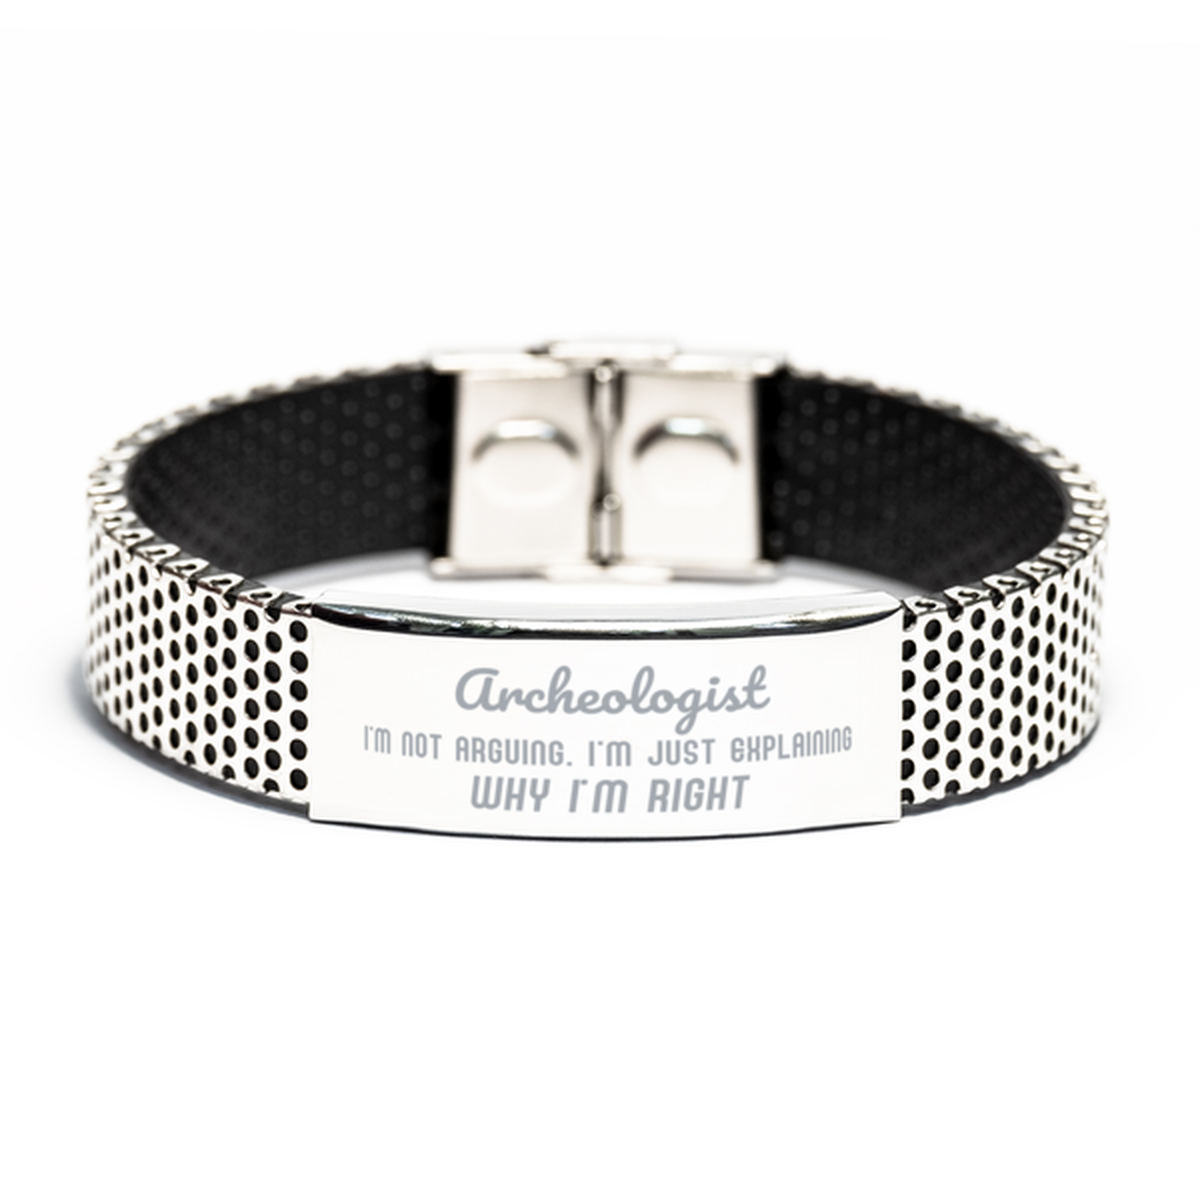 Archeologist I'm not Arguing. I'm Just Explaining Why I'm RIGHT Stainless Steel Bracelet, Funny Saying Quote Archeologist Gifts For Archeologist Graduation Birthday Christmas Gifts for Men Women Coworker